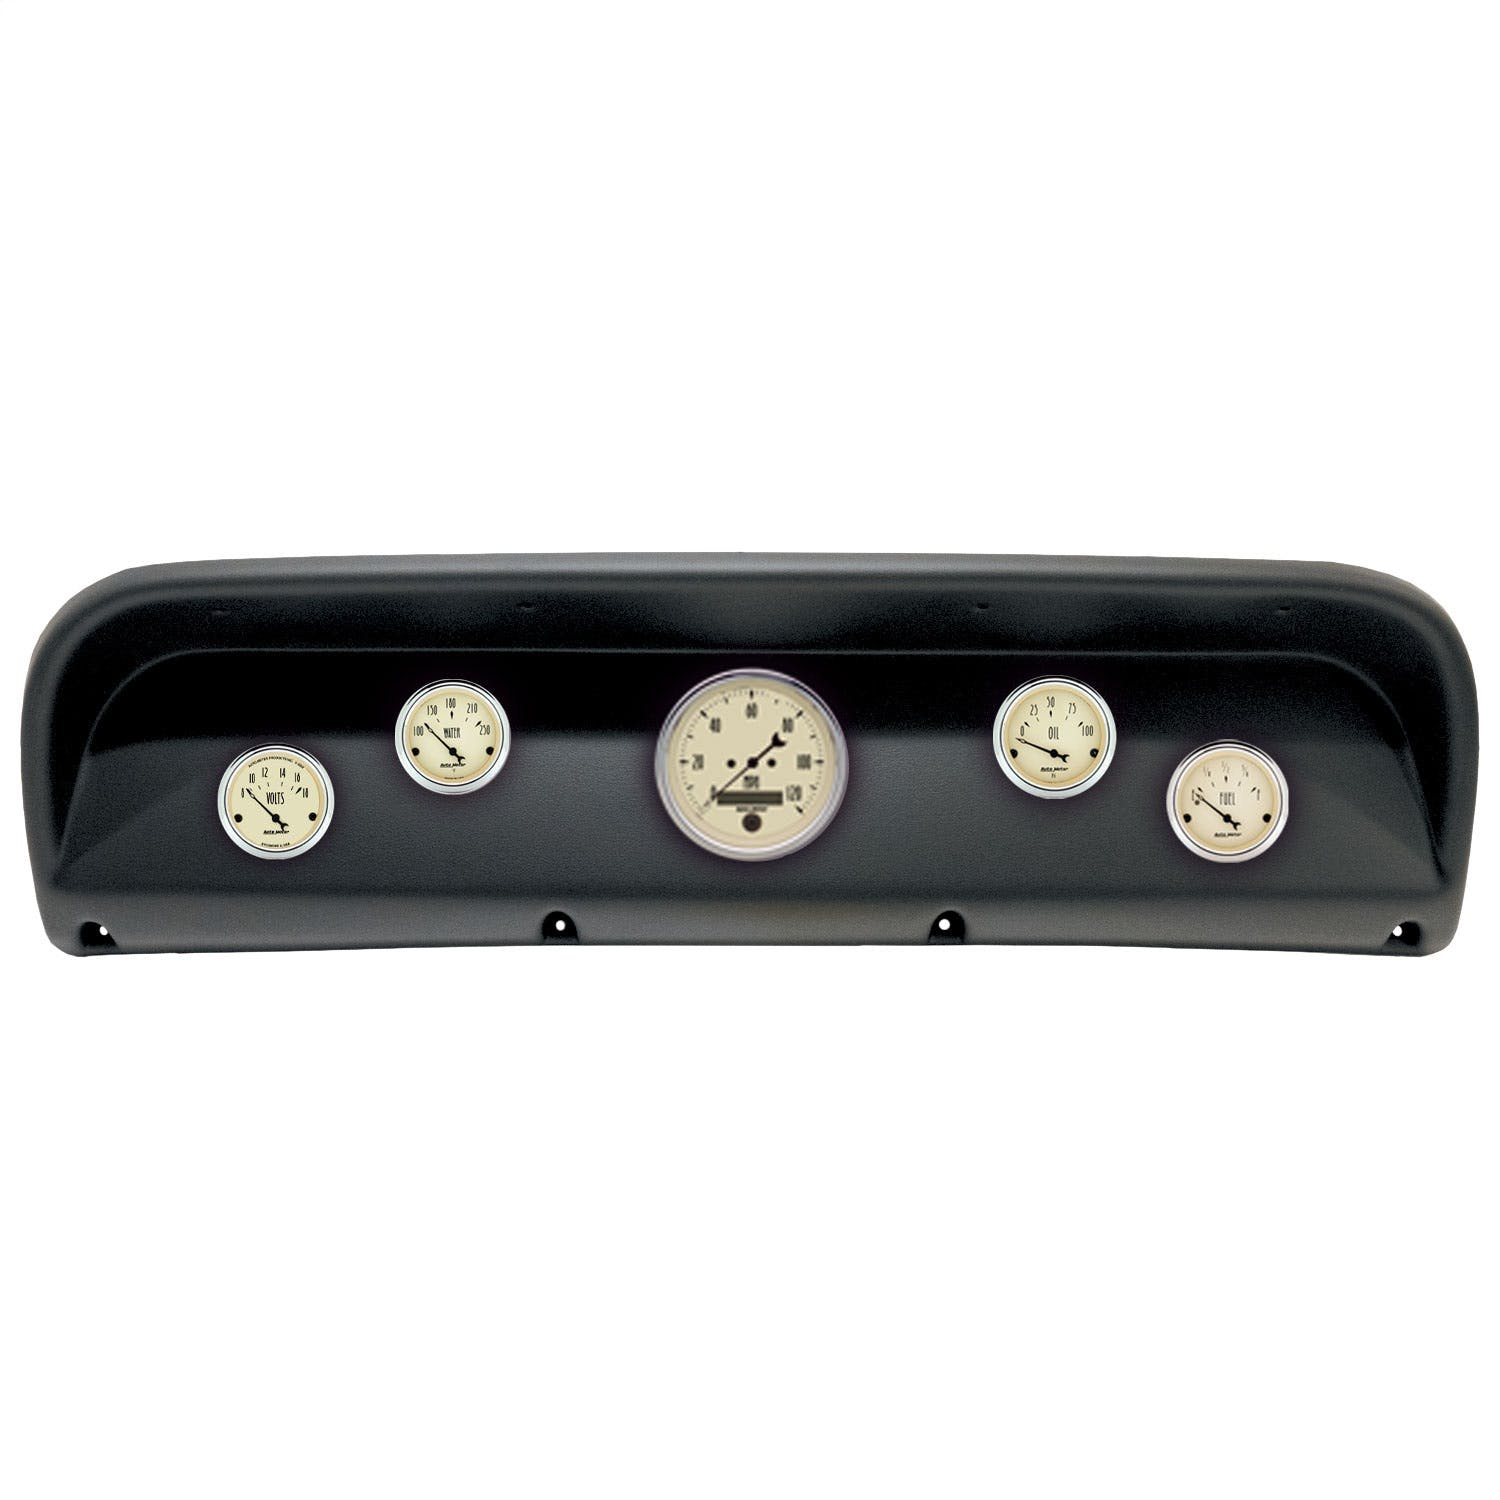 AutoMeter Products 2900-02 5 Gauge Direct-Fit Dash Kit, Ford Truck 67-72, Antique Beige